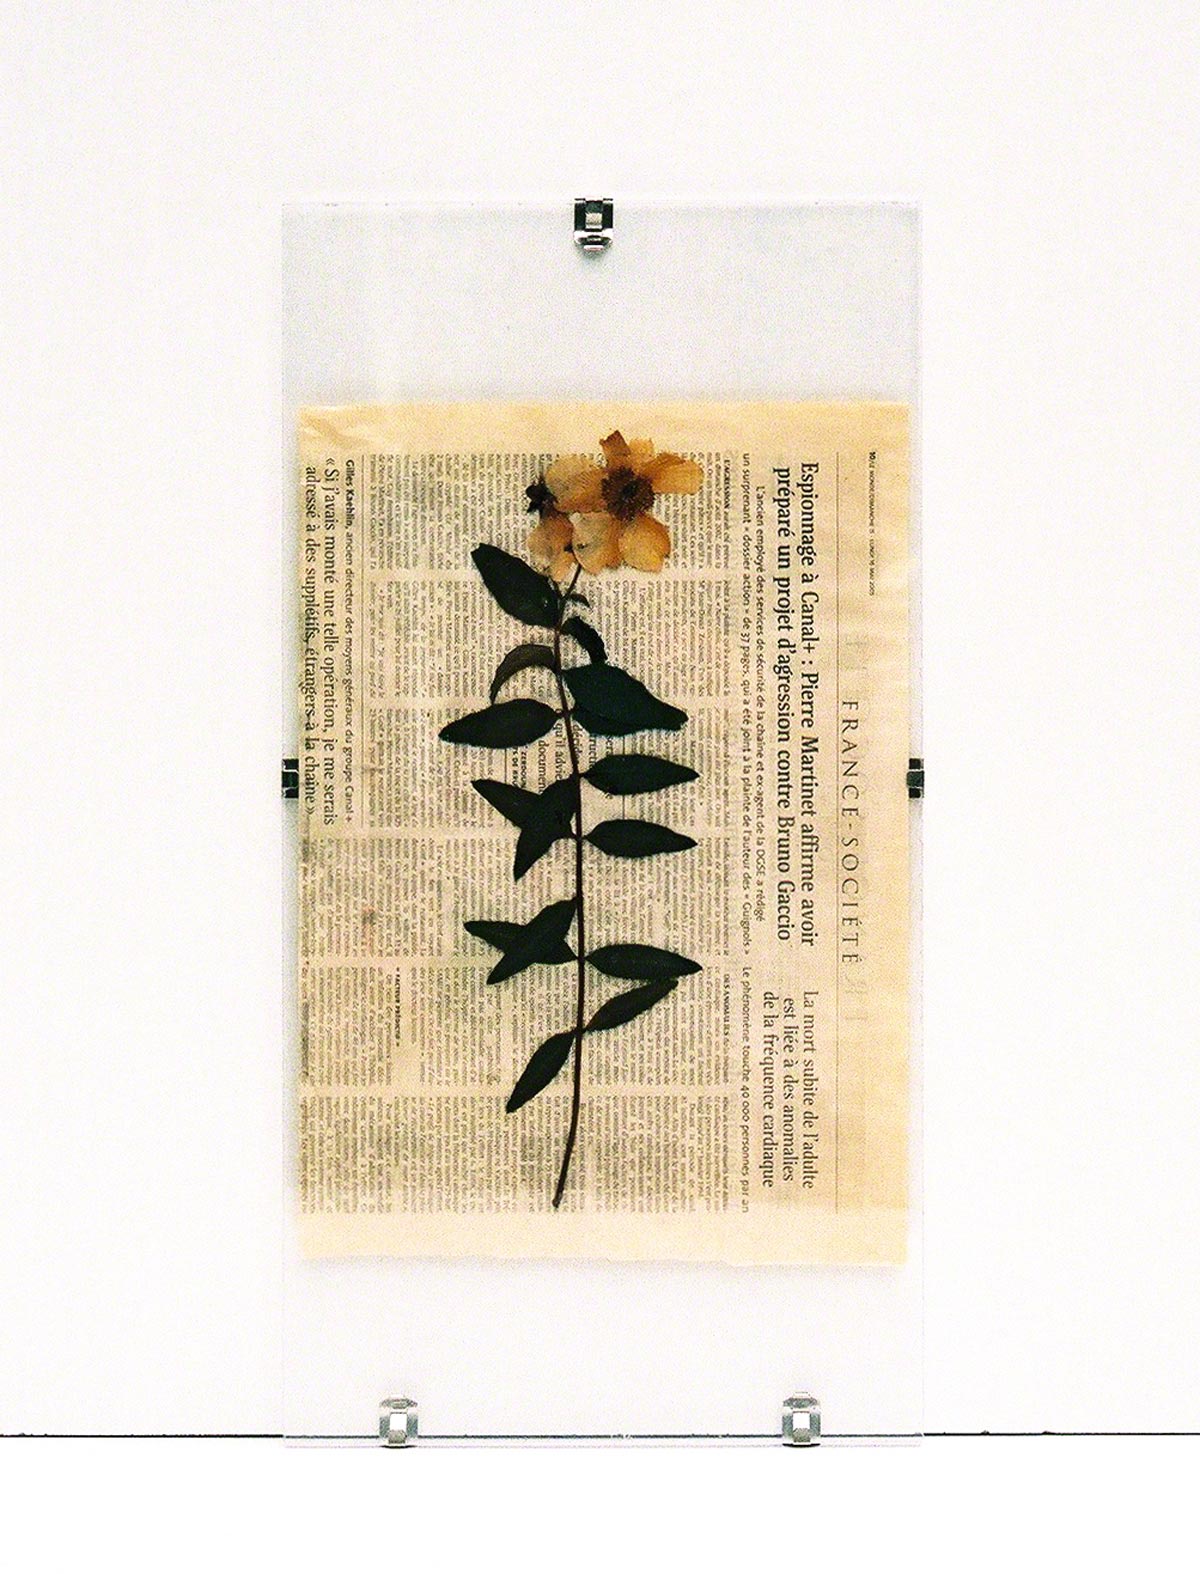 St-John's-wort from Kerzafloch dried on newspaper sheet and pressed under Plexiglas, Marie-Claire Raoul